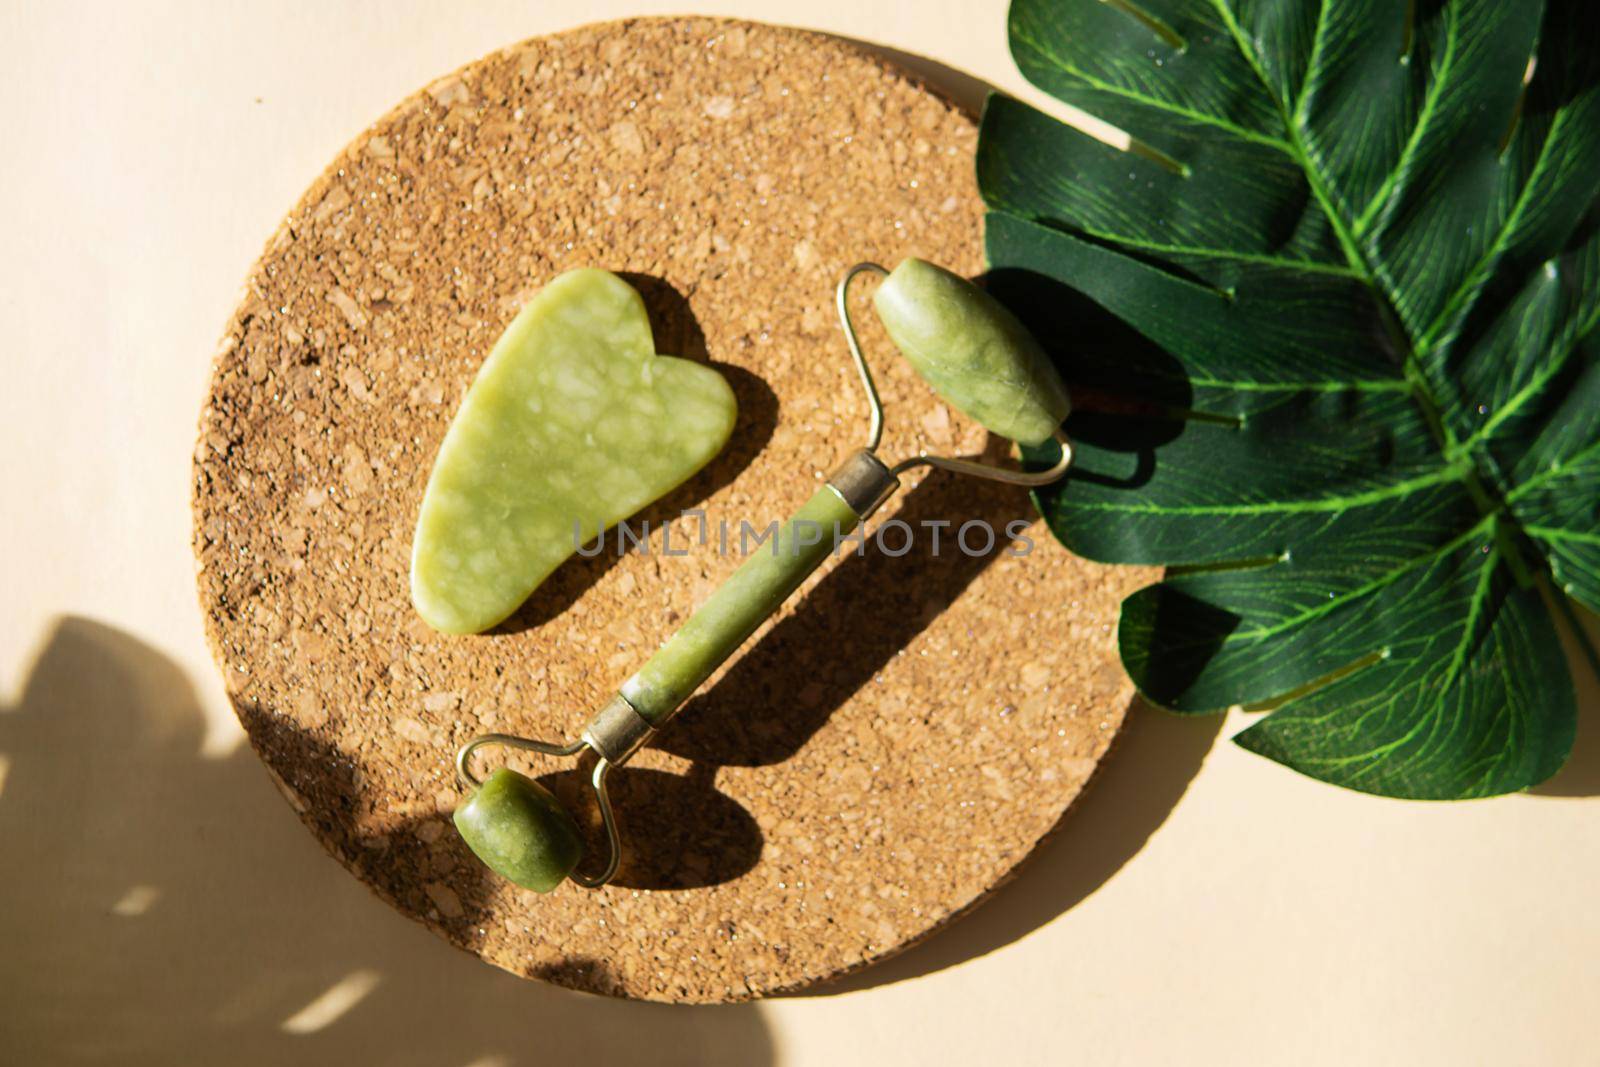 Jade Gua sha scraper and face roller massager on a cork round stand with a monstera leaf. Hard light, shadows, the concept self-care. Facial care. Zero waste. Lifting and toning treatment at home.